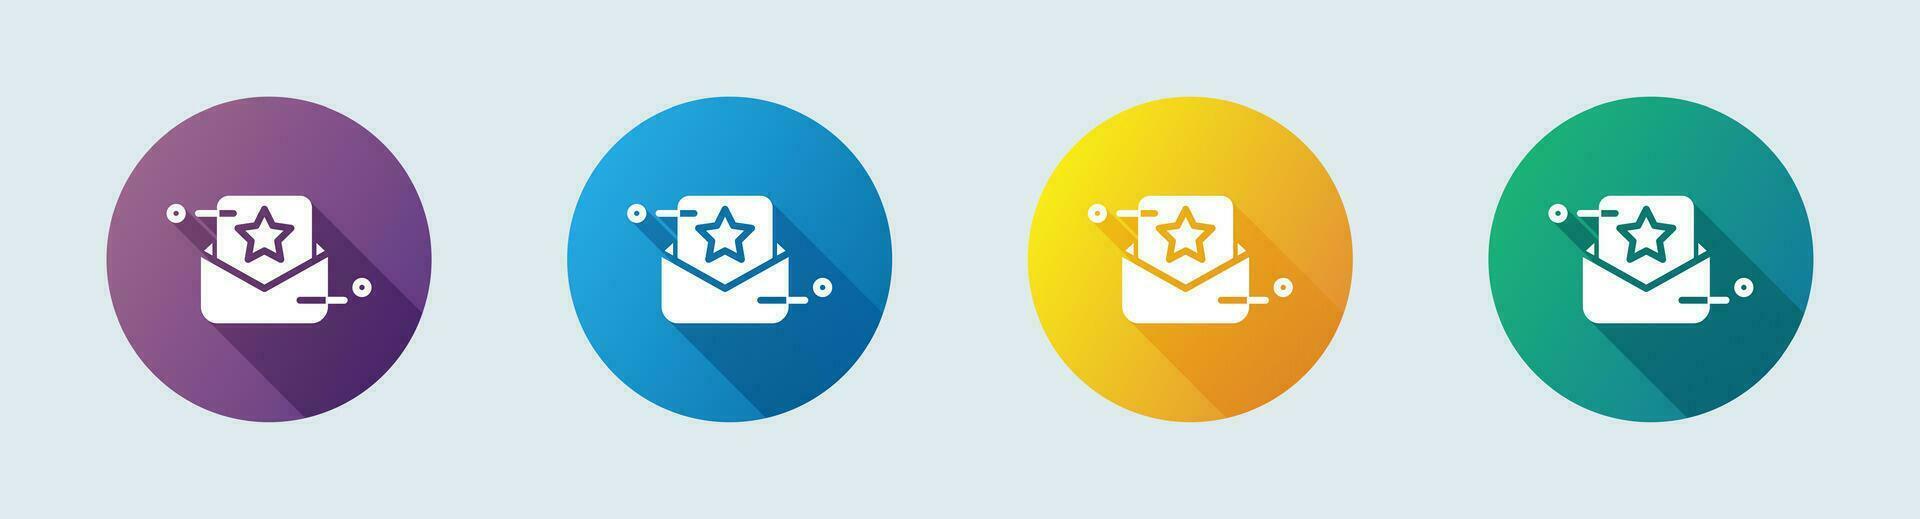 Nomination solid icon in flat design style. Achievement signs vector illustration.